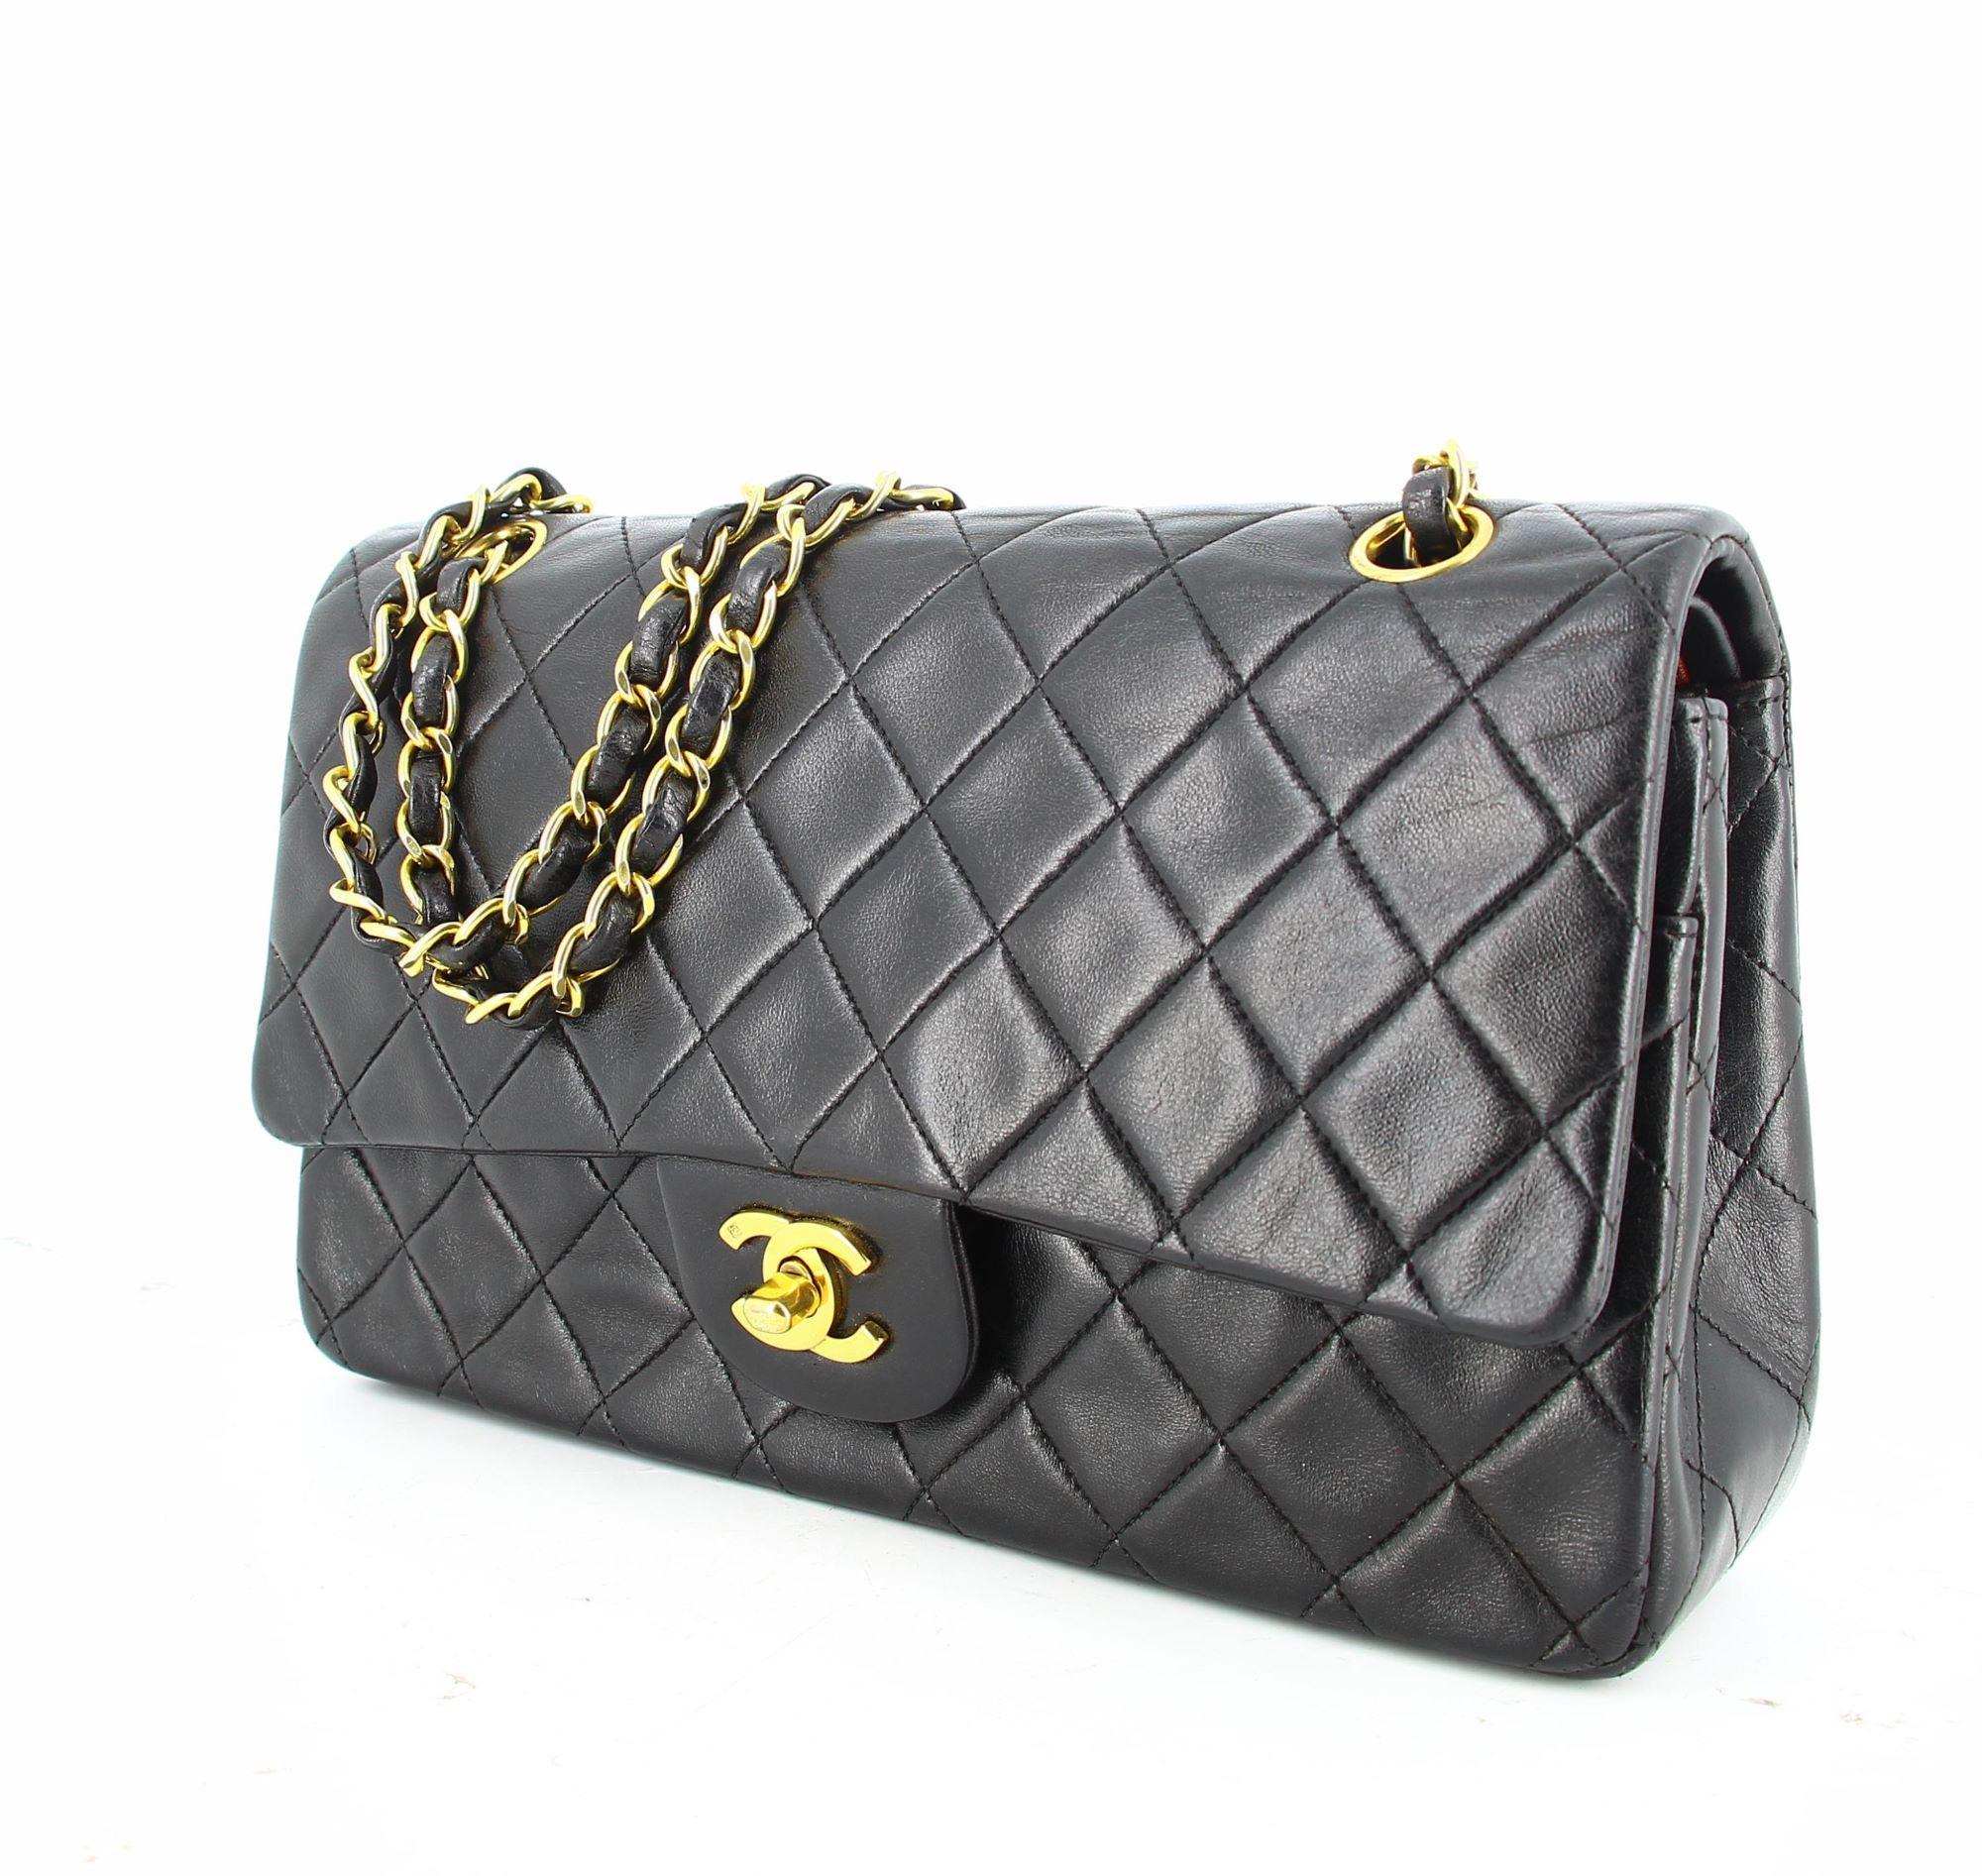 Chanel Black Timeless Bag
Very good condition show some light signs of use and wear but nothing visible.
Timeless bag, which is worn every day.
Quilted leather, gold clasp, gold chains wrapped in leather.
A beautiful double flap chanel with a red